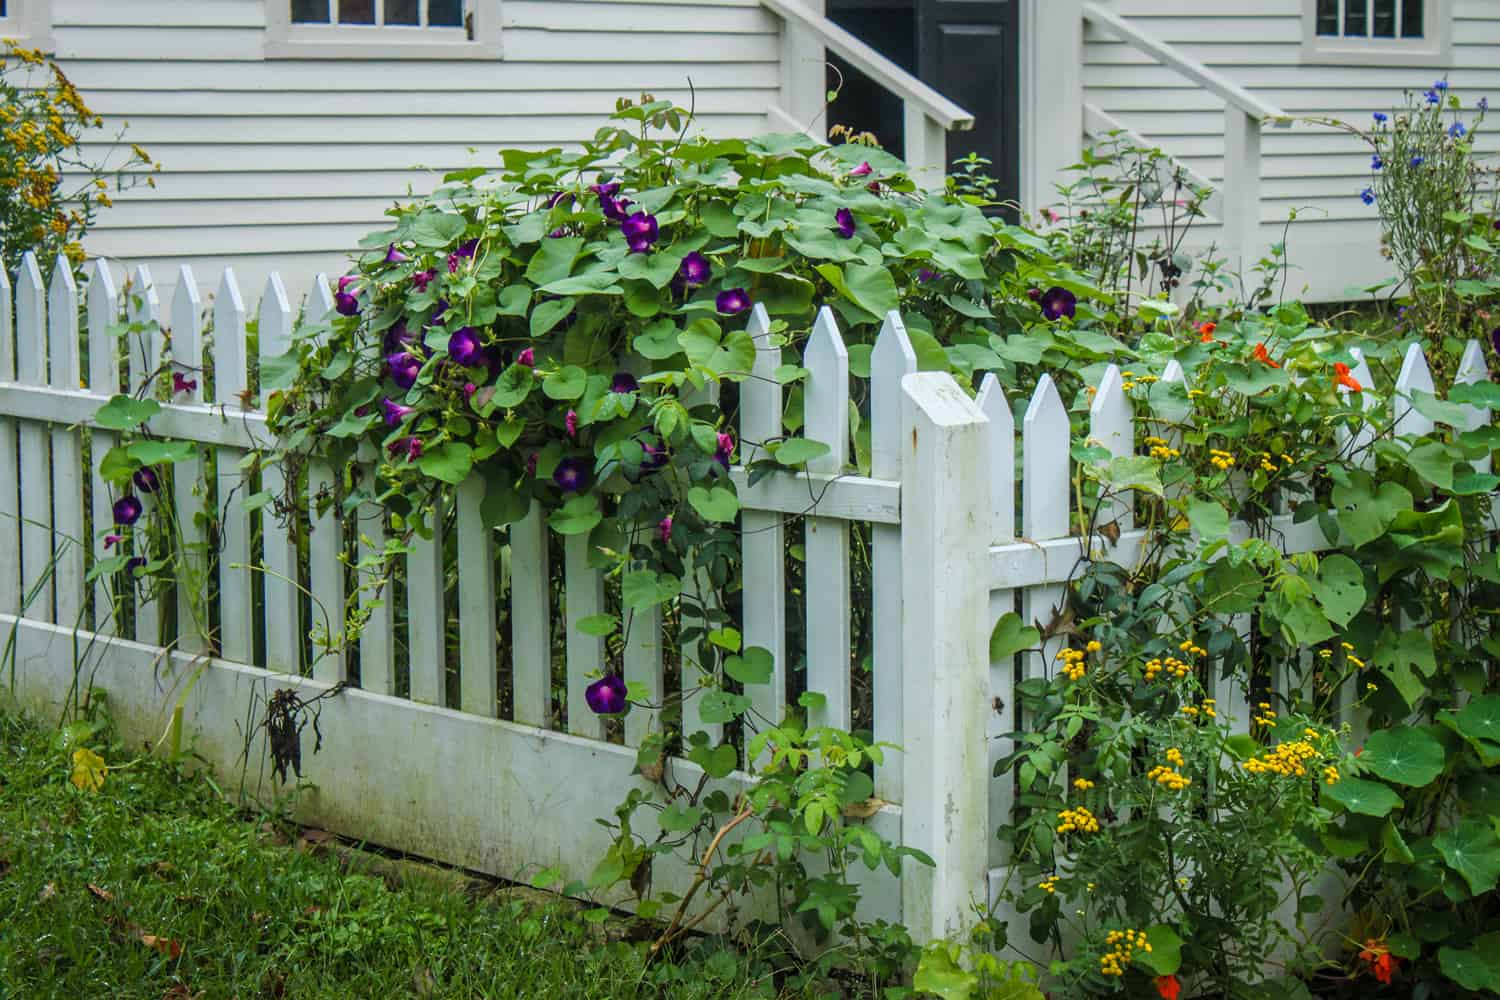 lowers vining up on white picket fence at corner of yard of white frame house